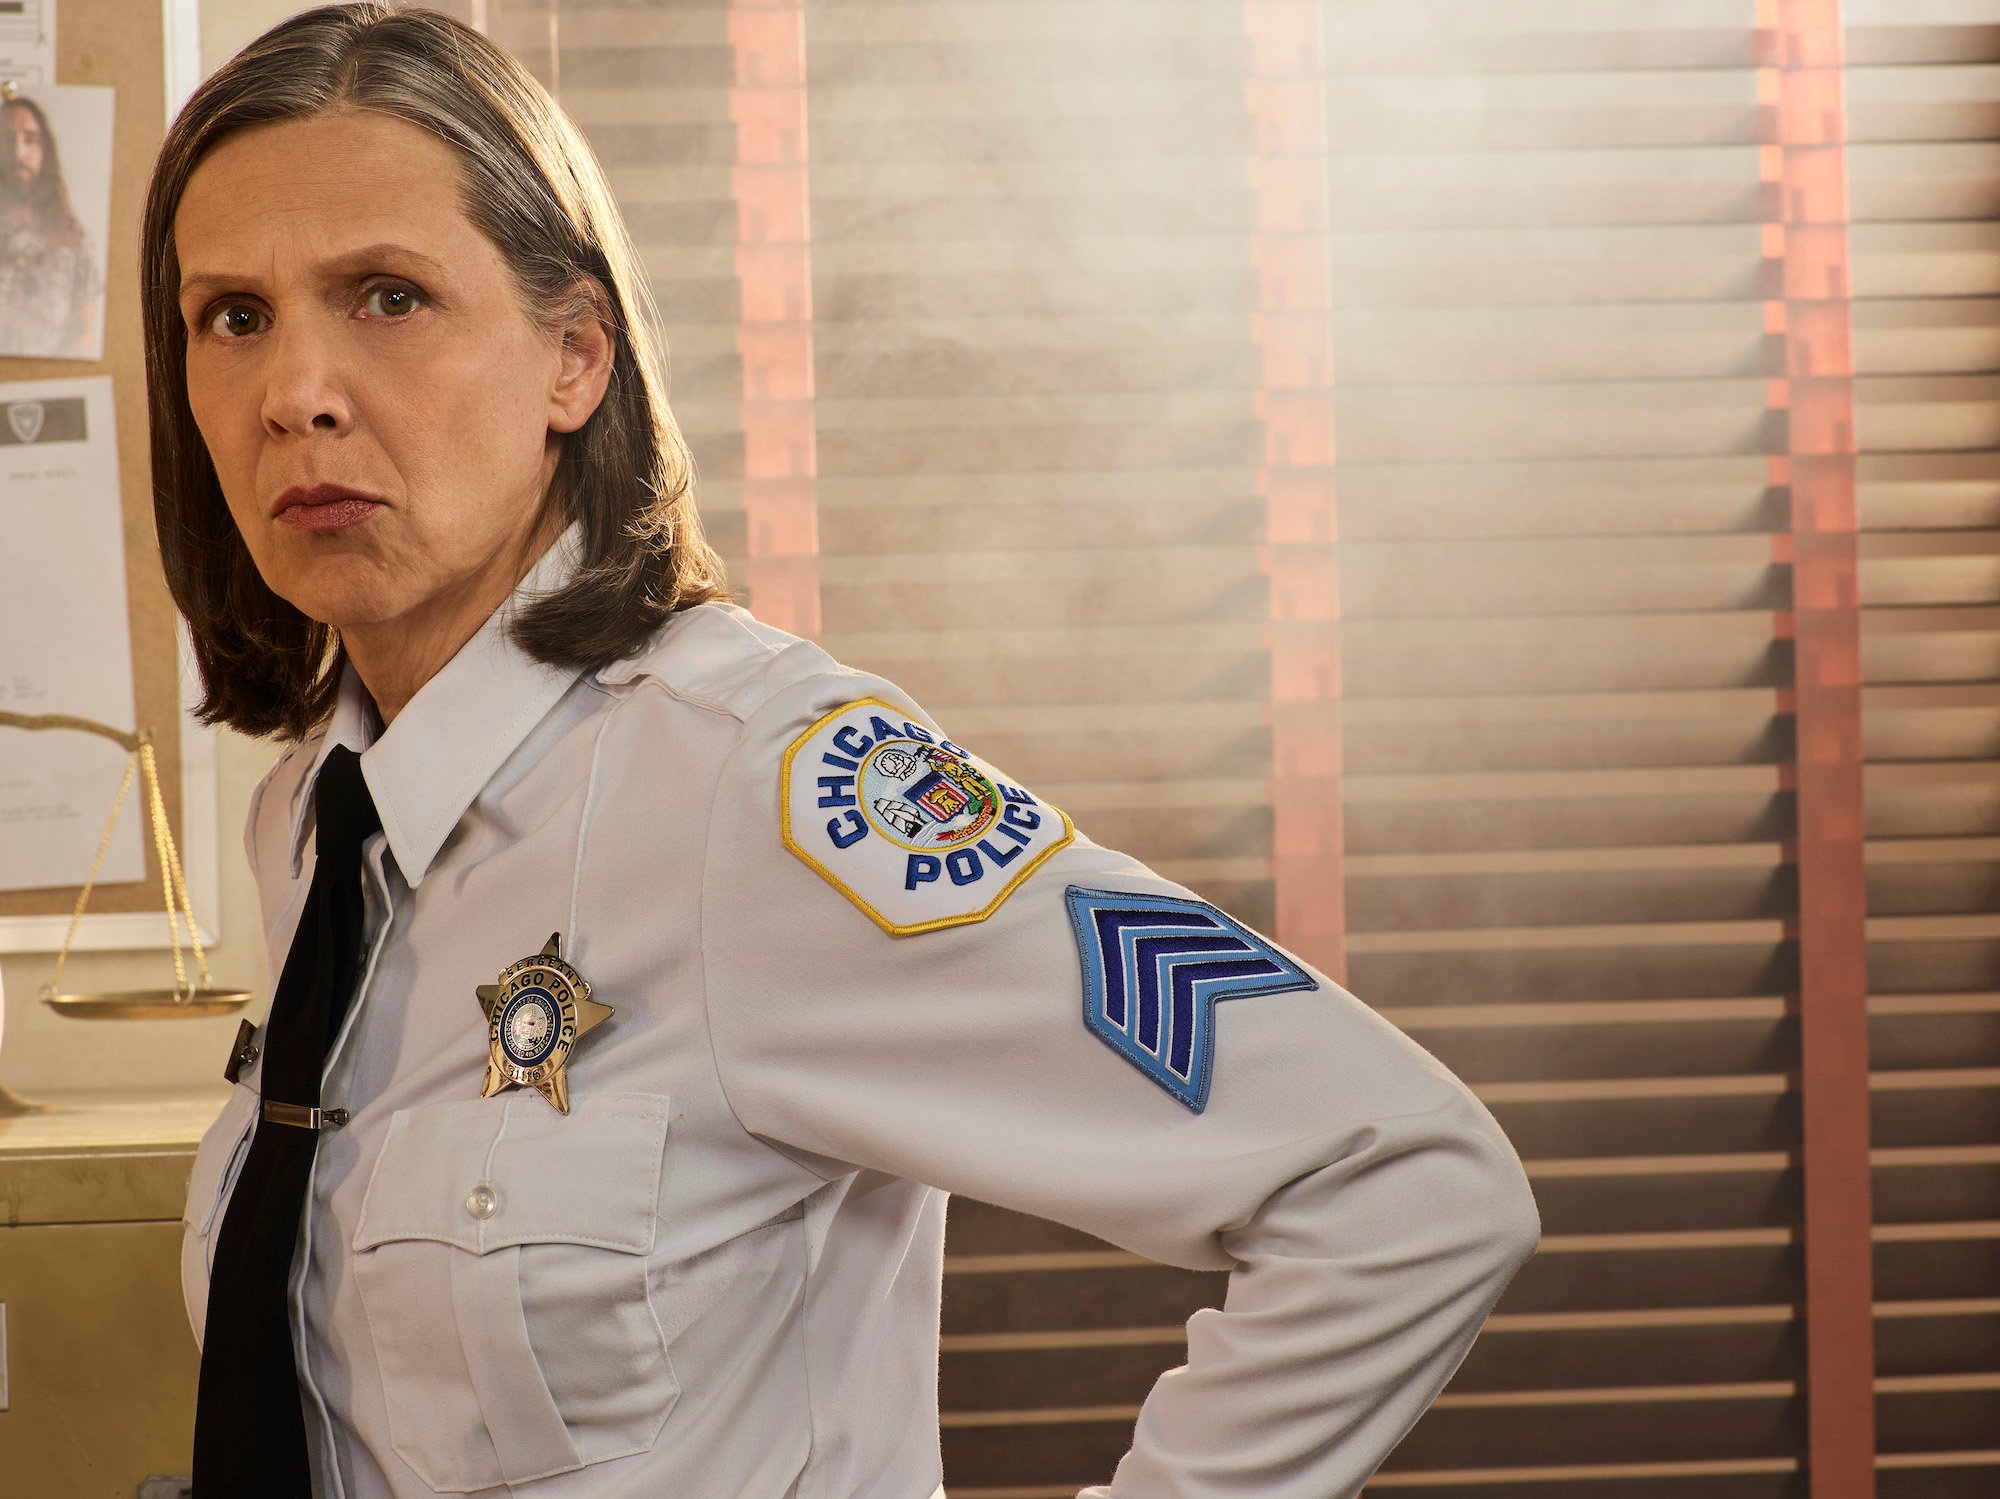 Amy Morton as Sgt. Trudy Platt, looking at the camera, not smiling